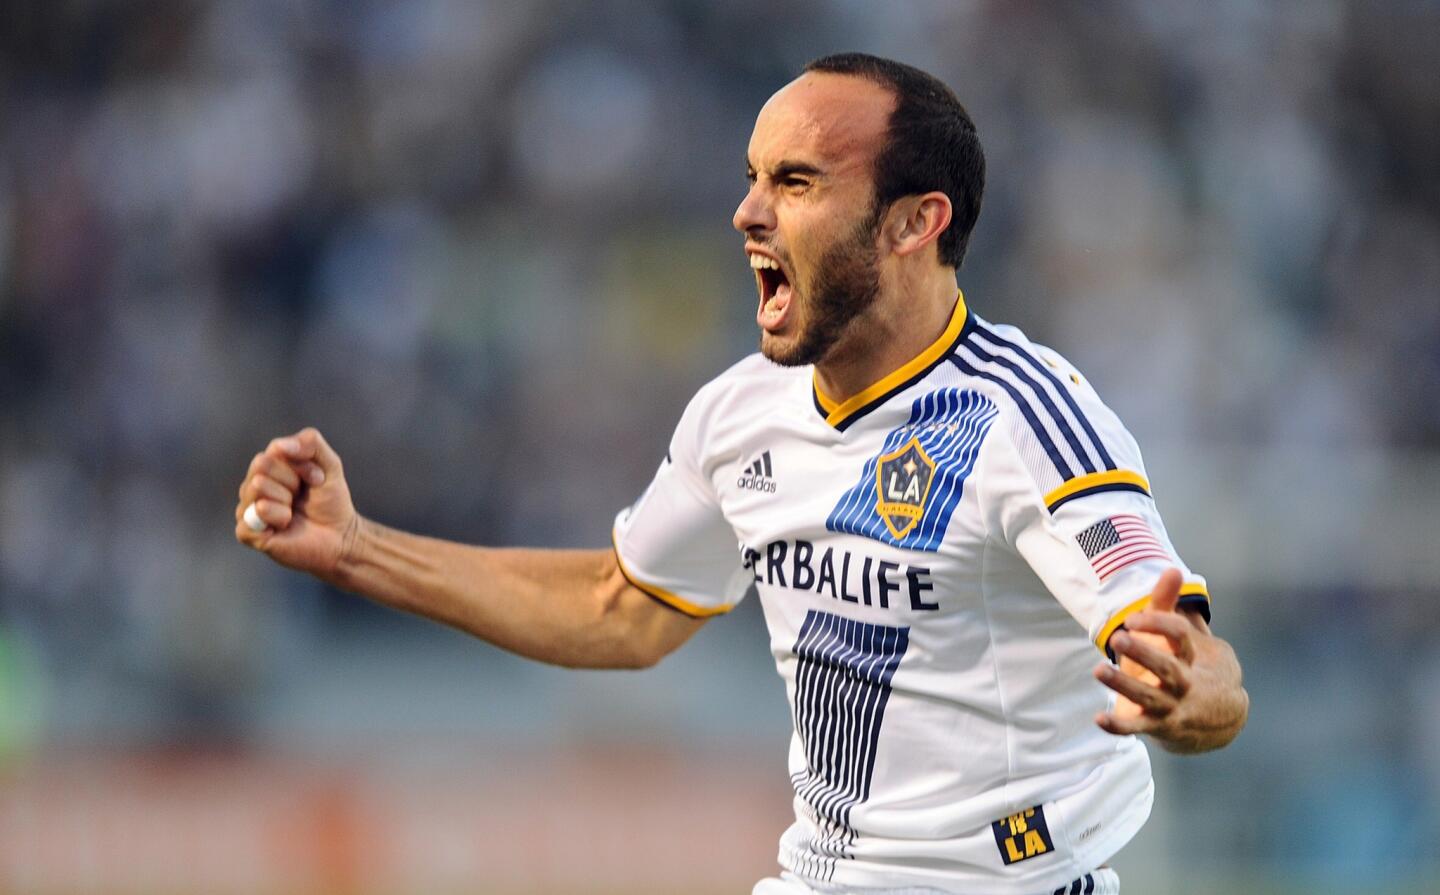 Galaxy midfielder Landon Donovan reacts after scoring the first of his three goals against Real Salt Lake in an MLS playoff game on Sunday at StubHub Center.